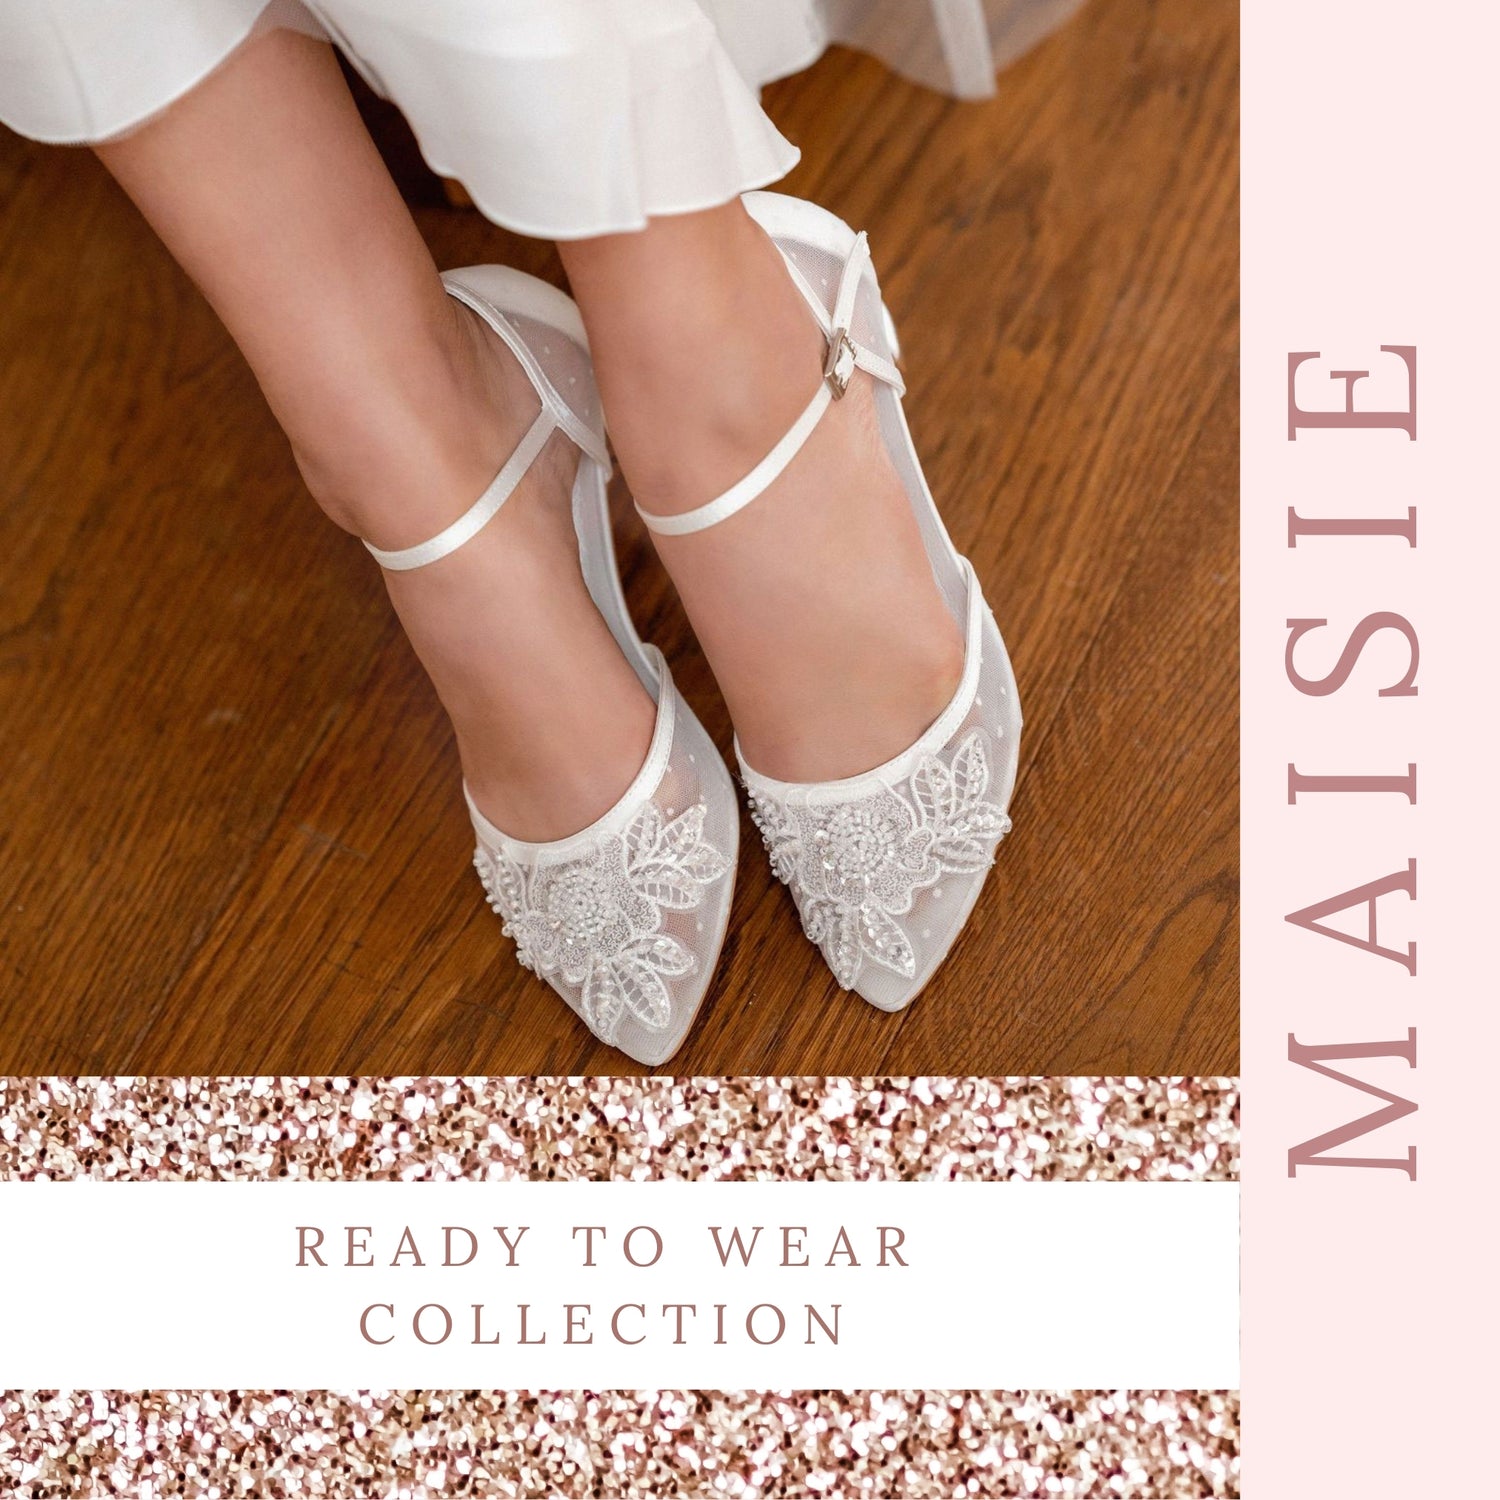 mother-of-the-bride-shoes-low-heel